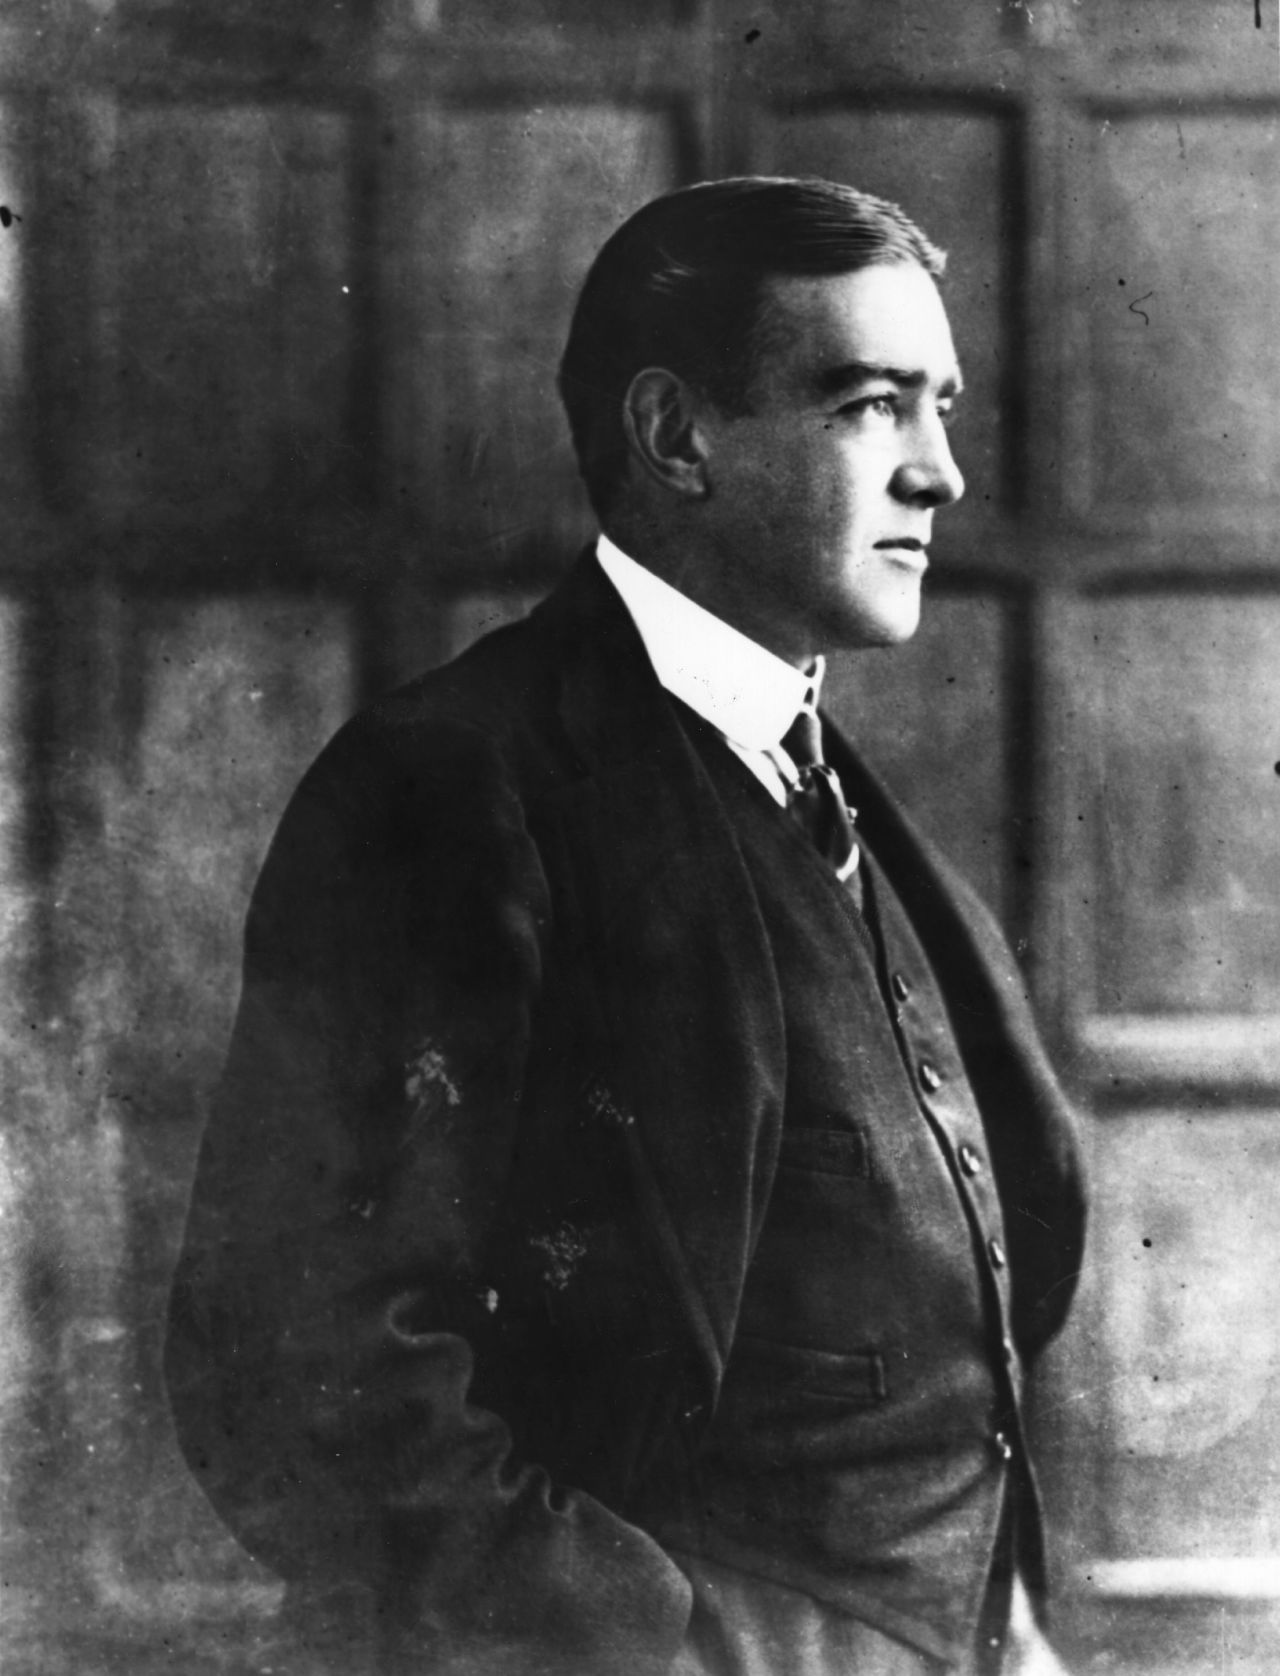 Ernest Shackleton, pictured, was an Anglo-Irish polar explorer and one of the principal figures of a period in the early 20th century  known as the "Heroic Age of Antarctic Exploration". 